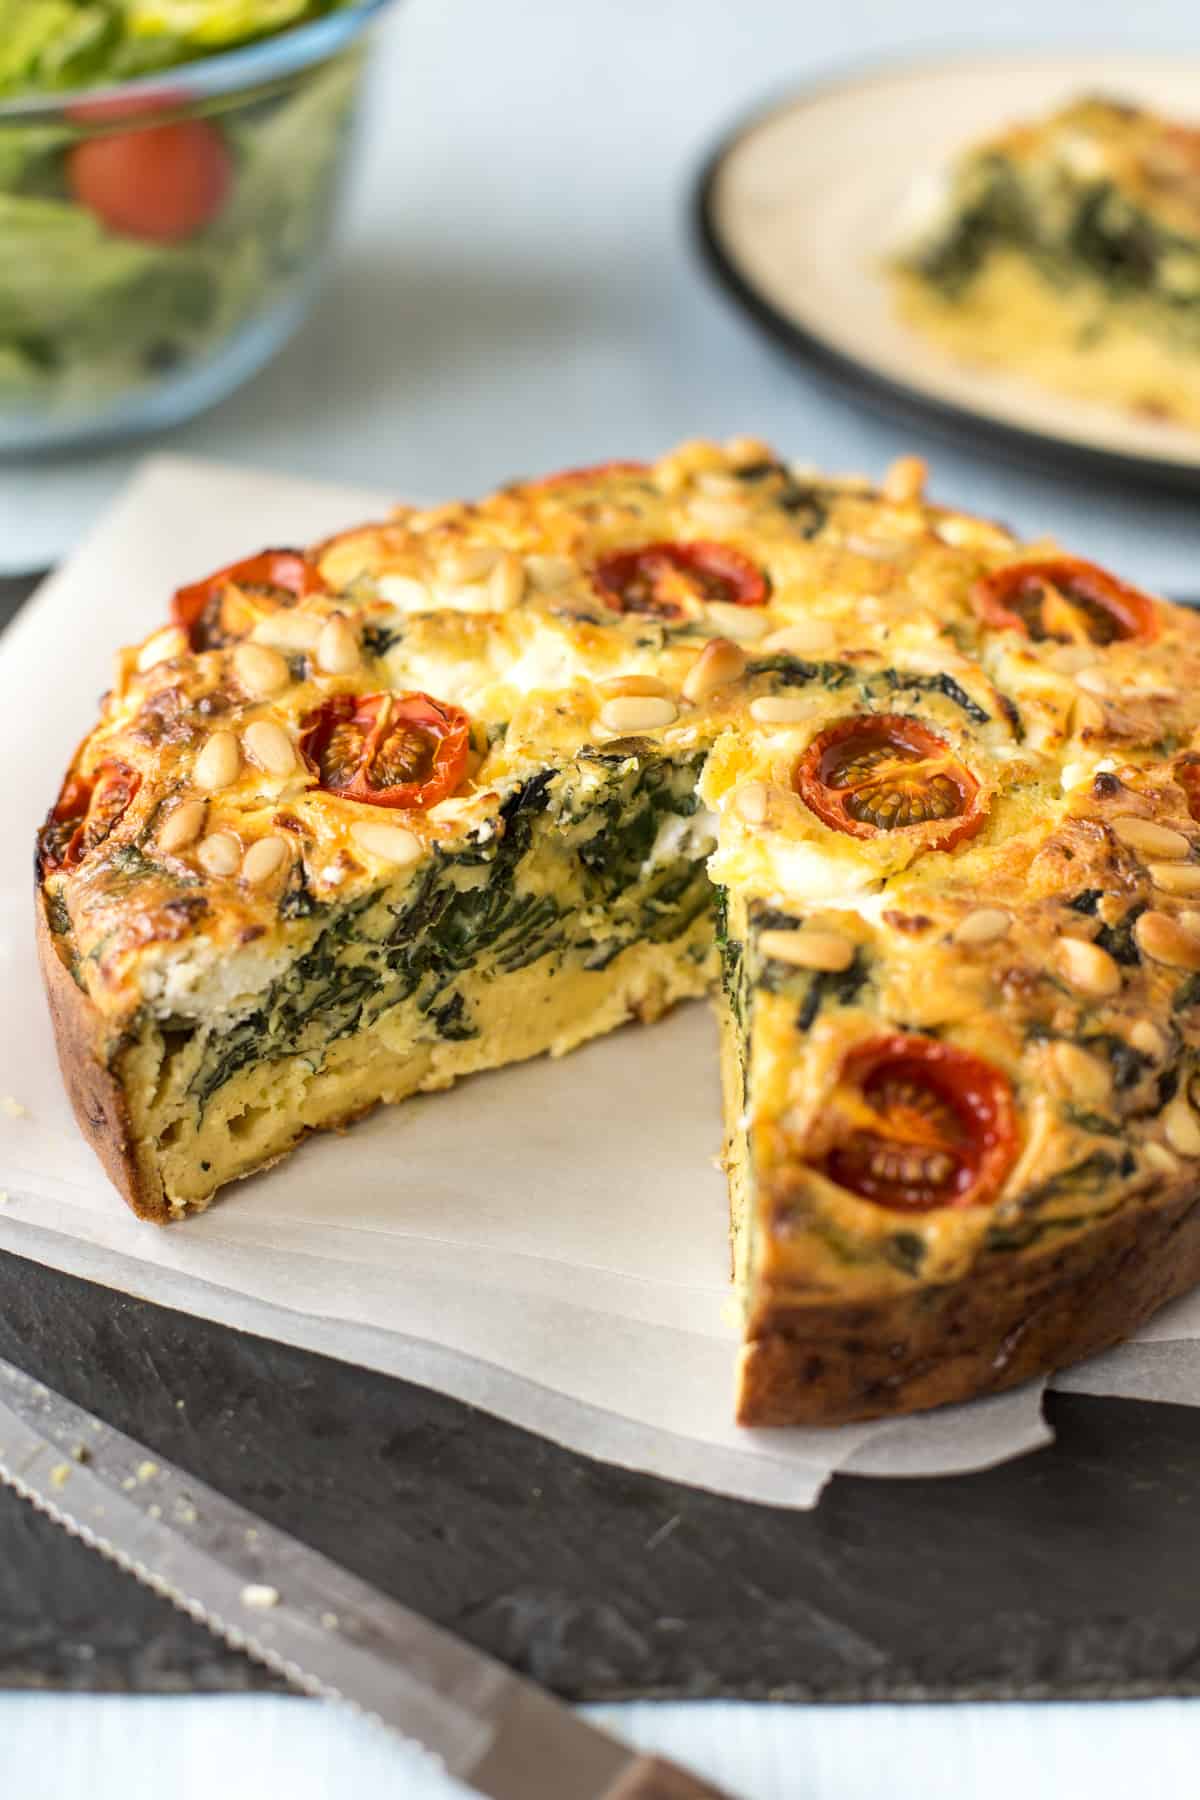 A spinach and tomato quiche with a slice removed.